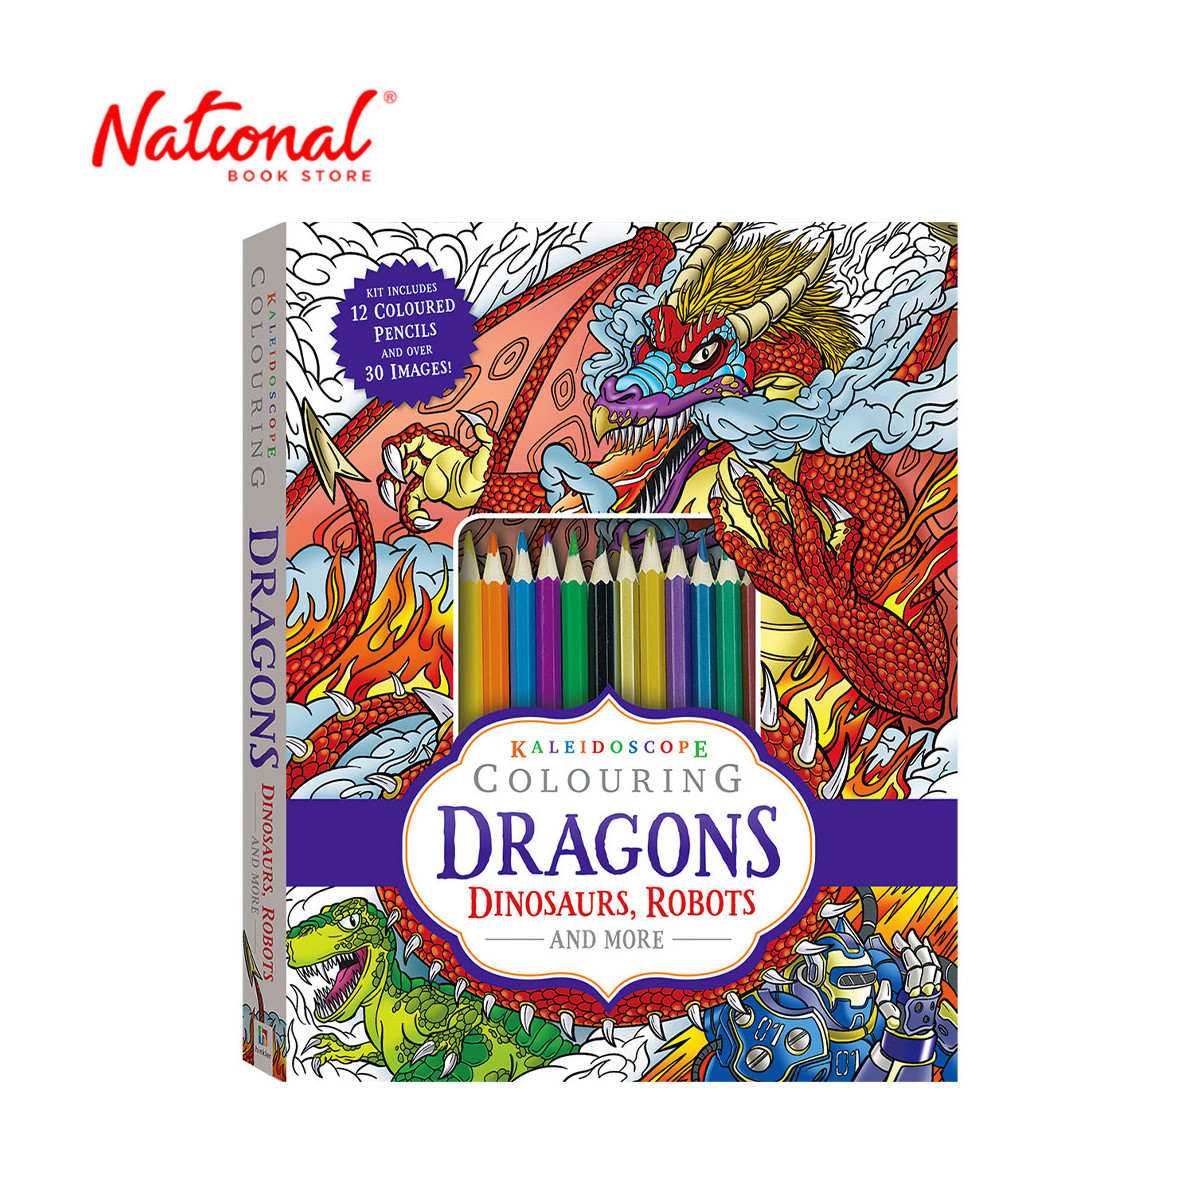 Kaleidoscope Colouring Kit: Dragons, Dinosaurs, Robots And More - Trade Paperback